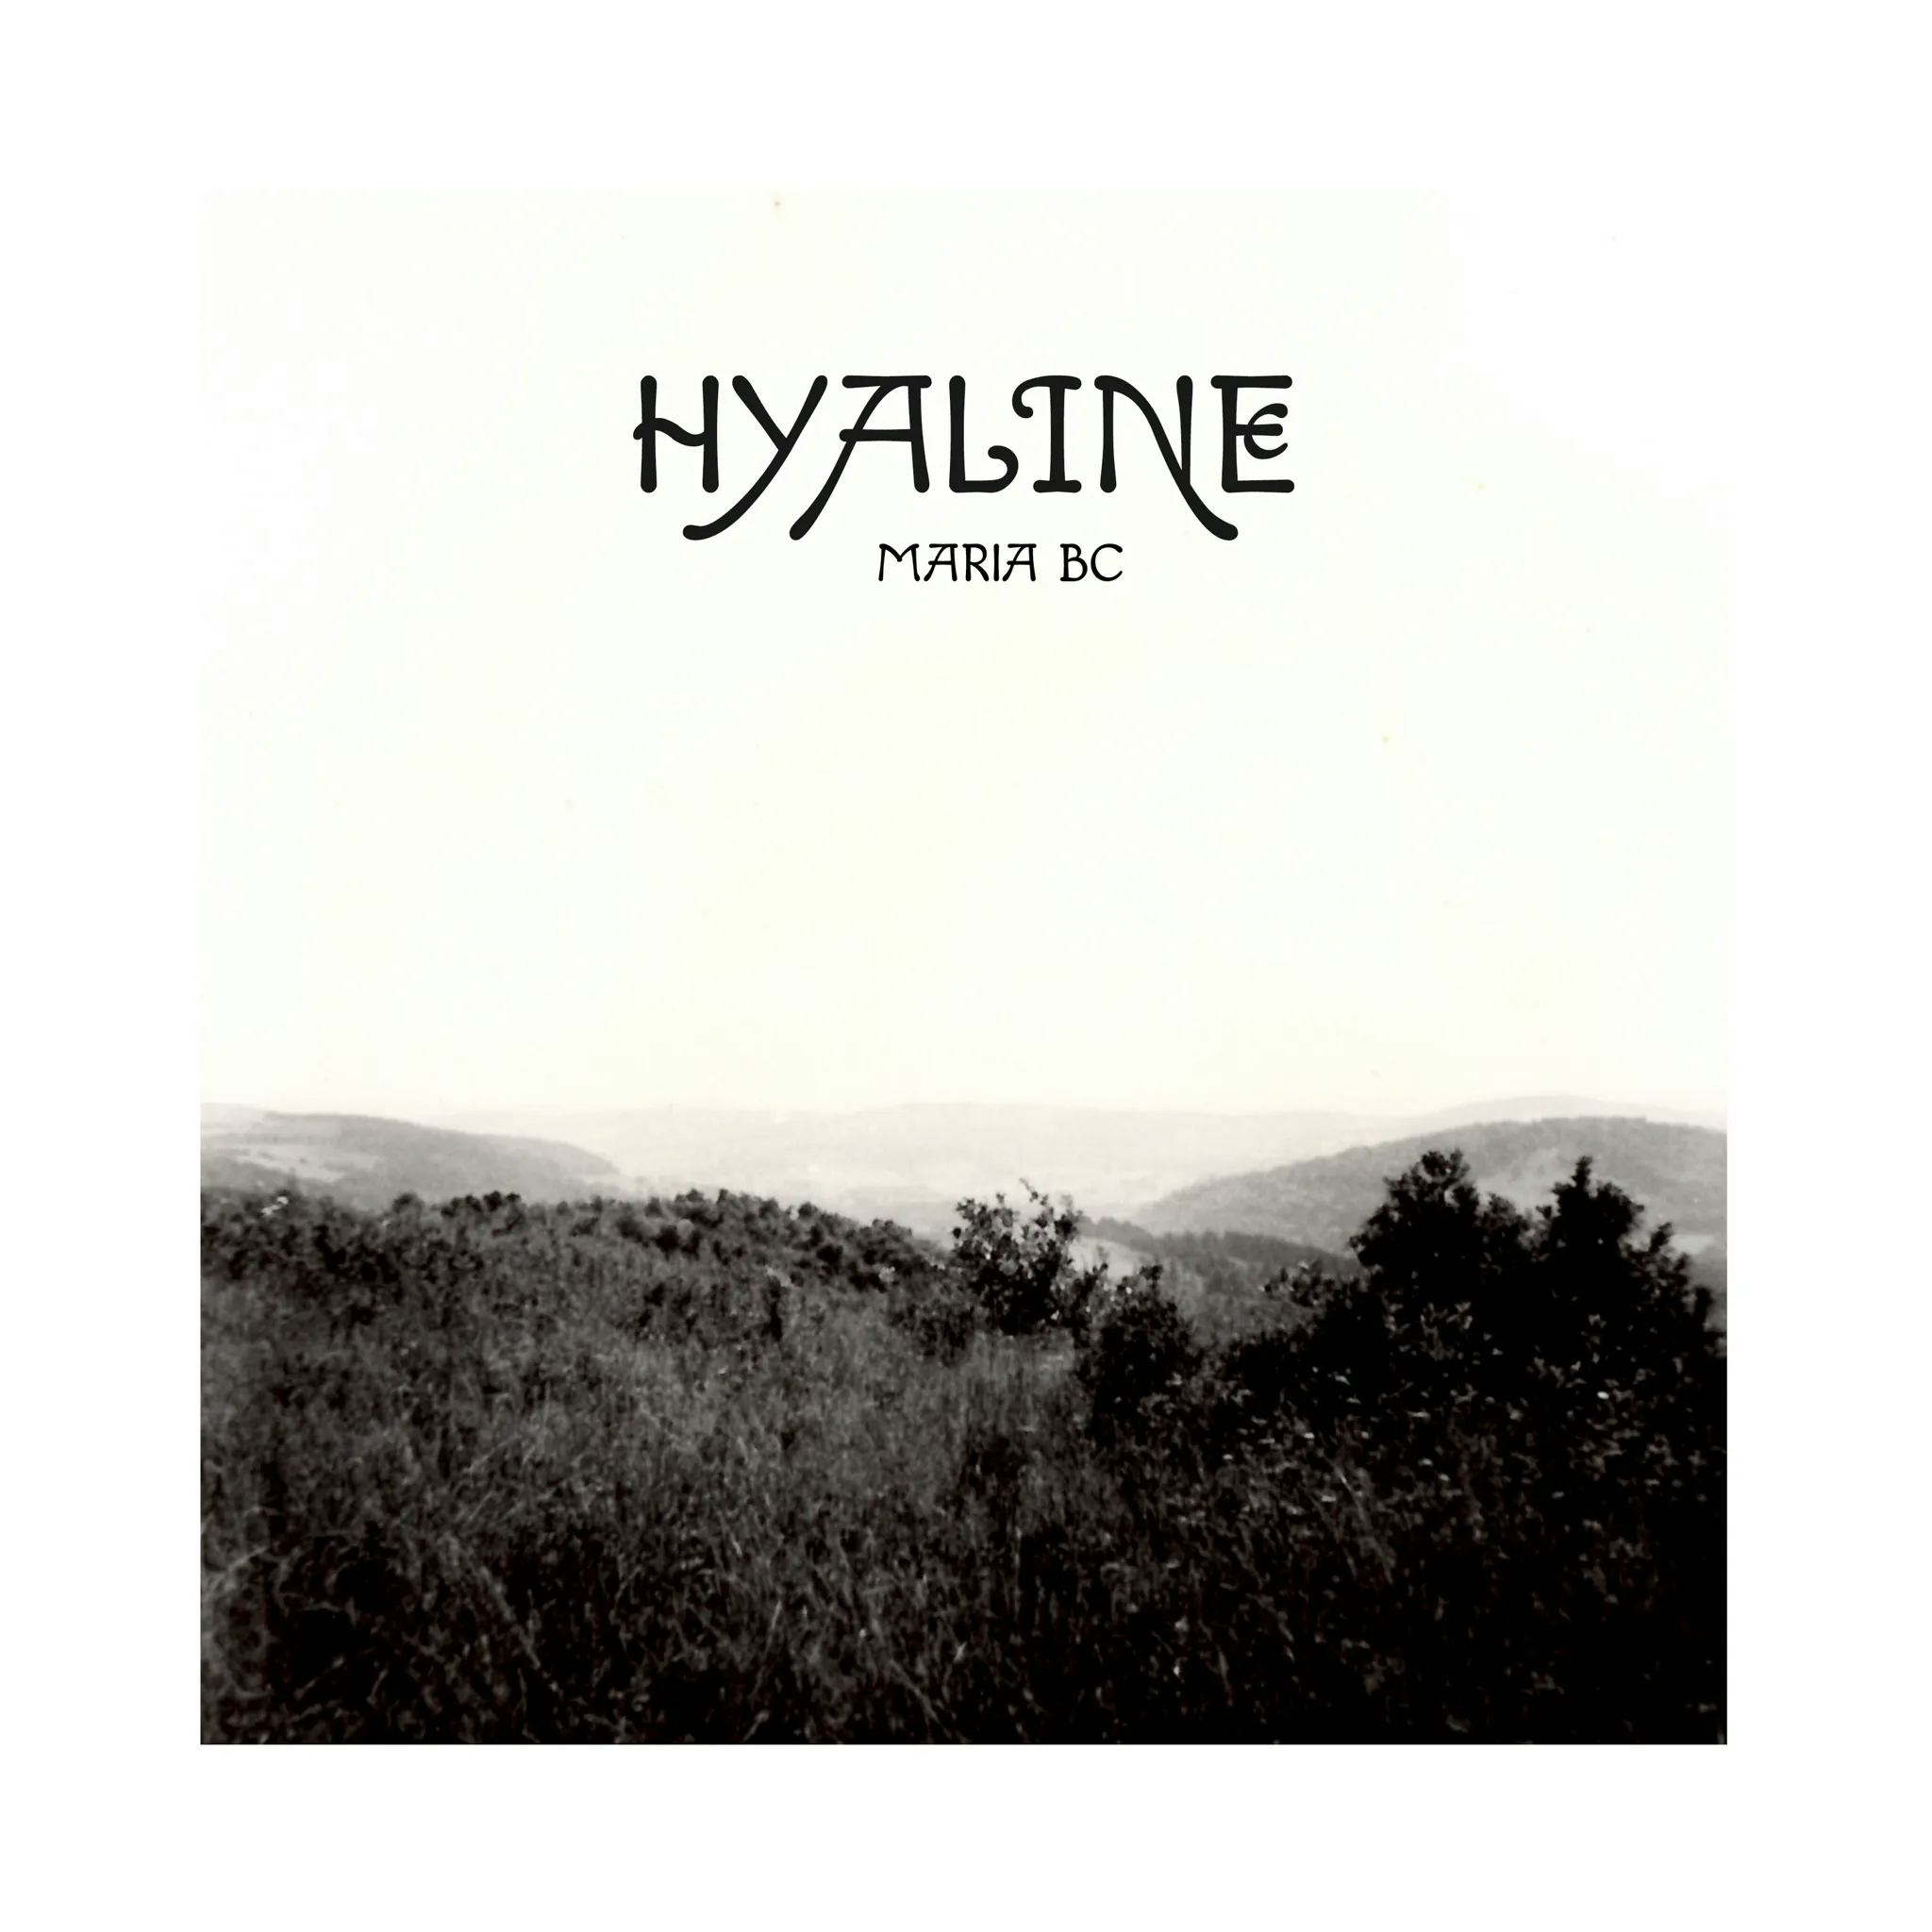 Album artwork for Hyaline by Maria BC